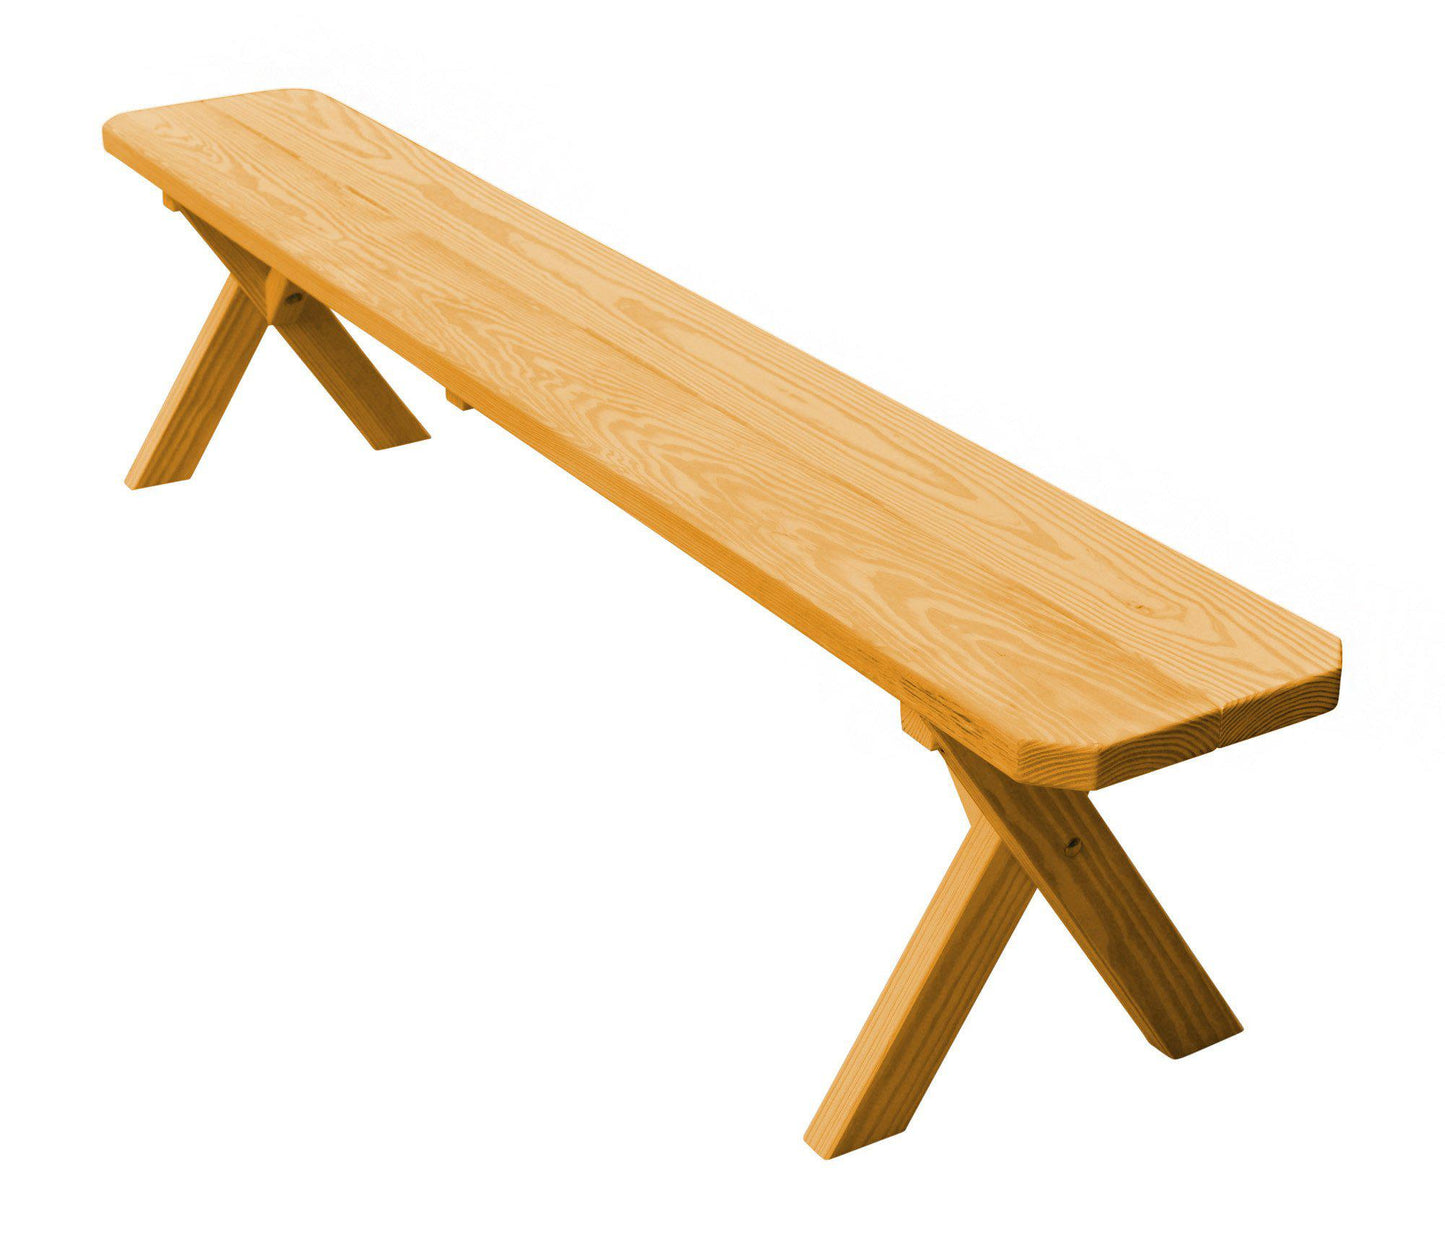 A&L Furniture Co. Yellow Pine 70" Crossleg Bench Only - LEAD TIME TO SHIP 10 BUSINESS DAYS